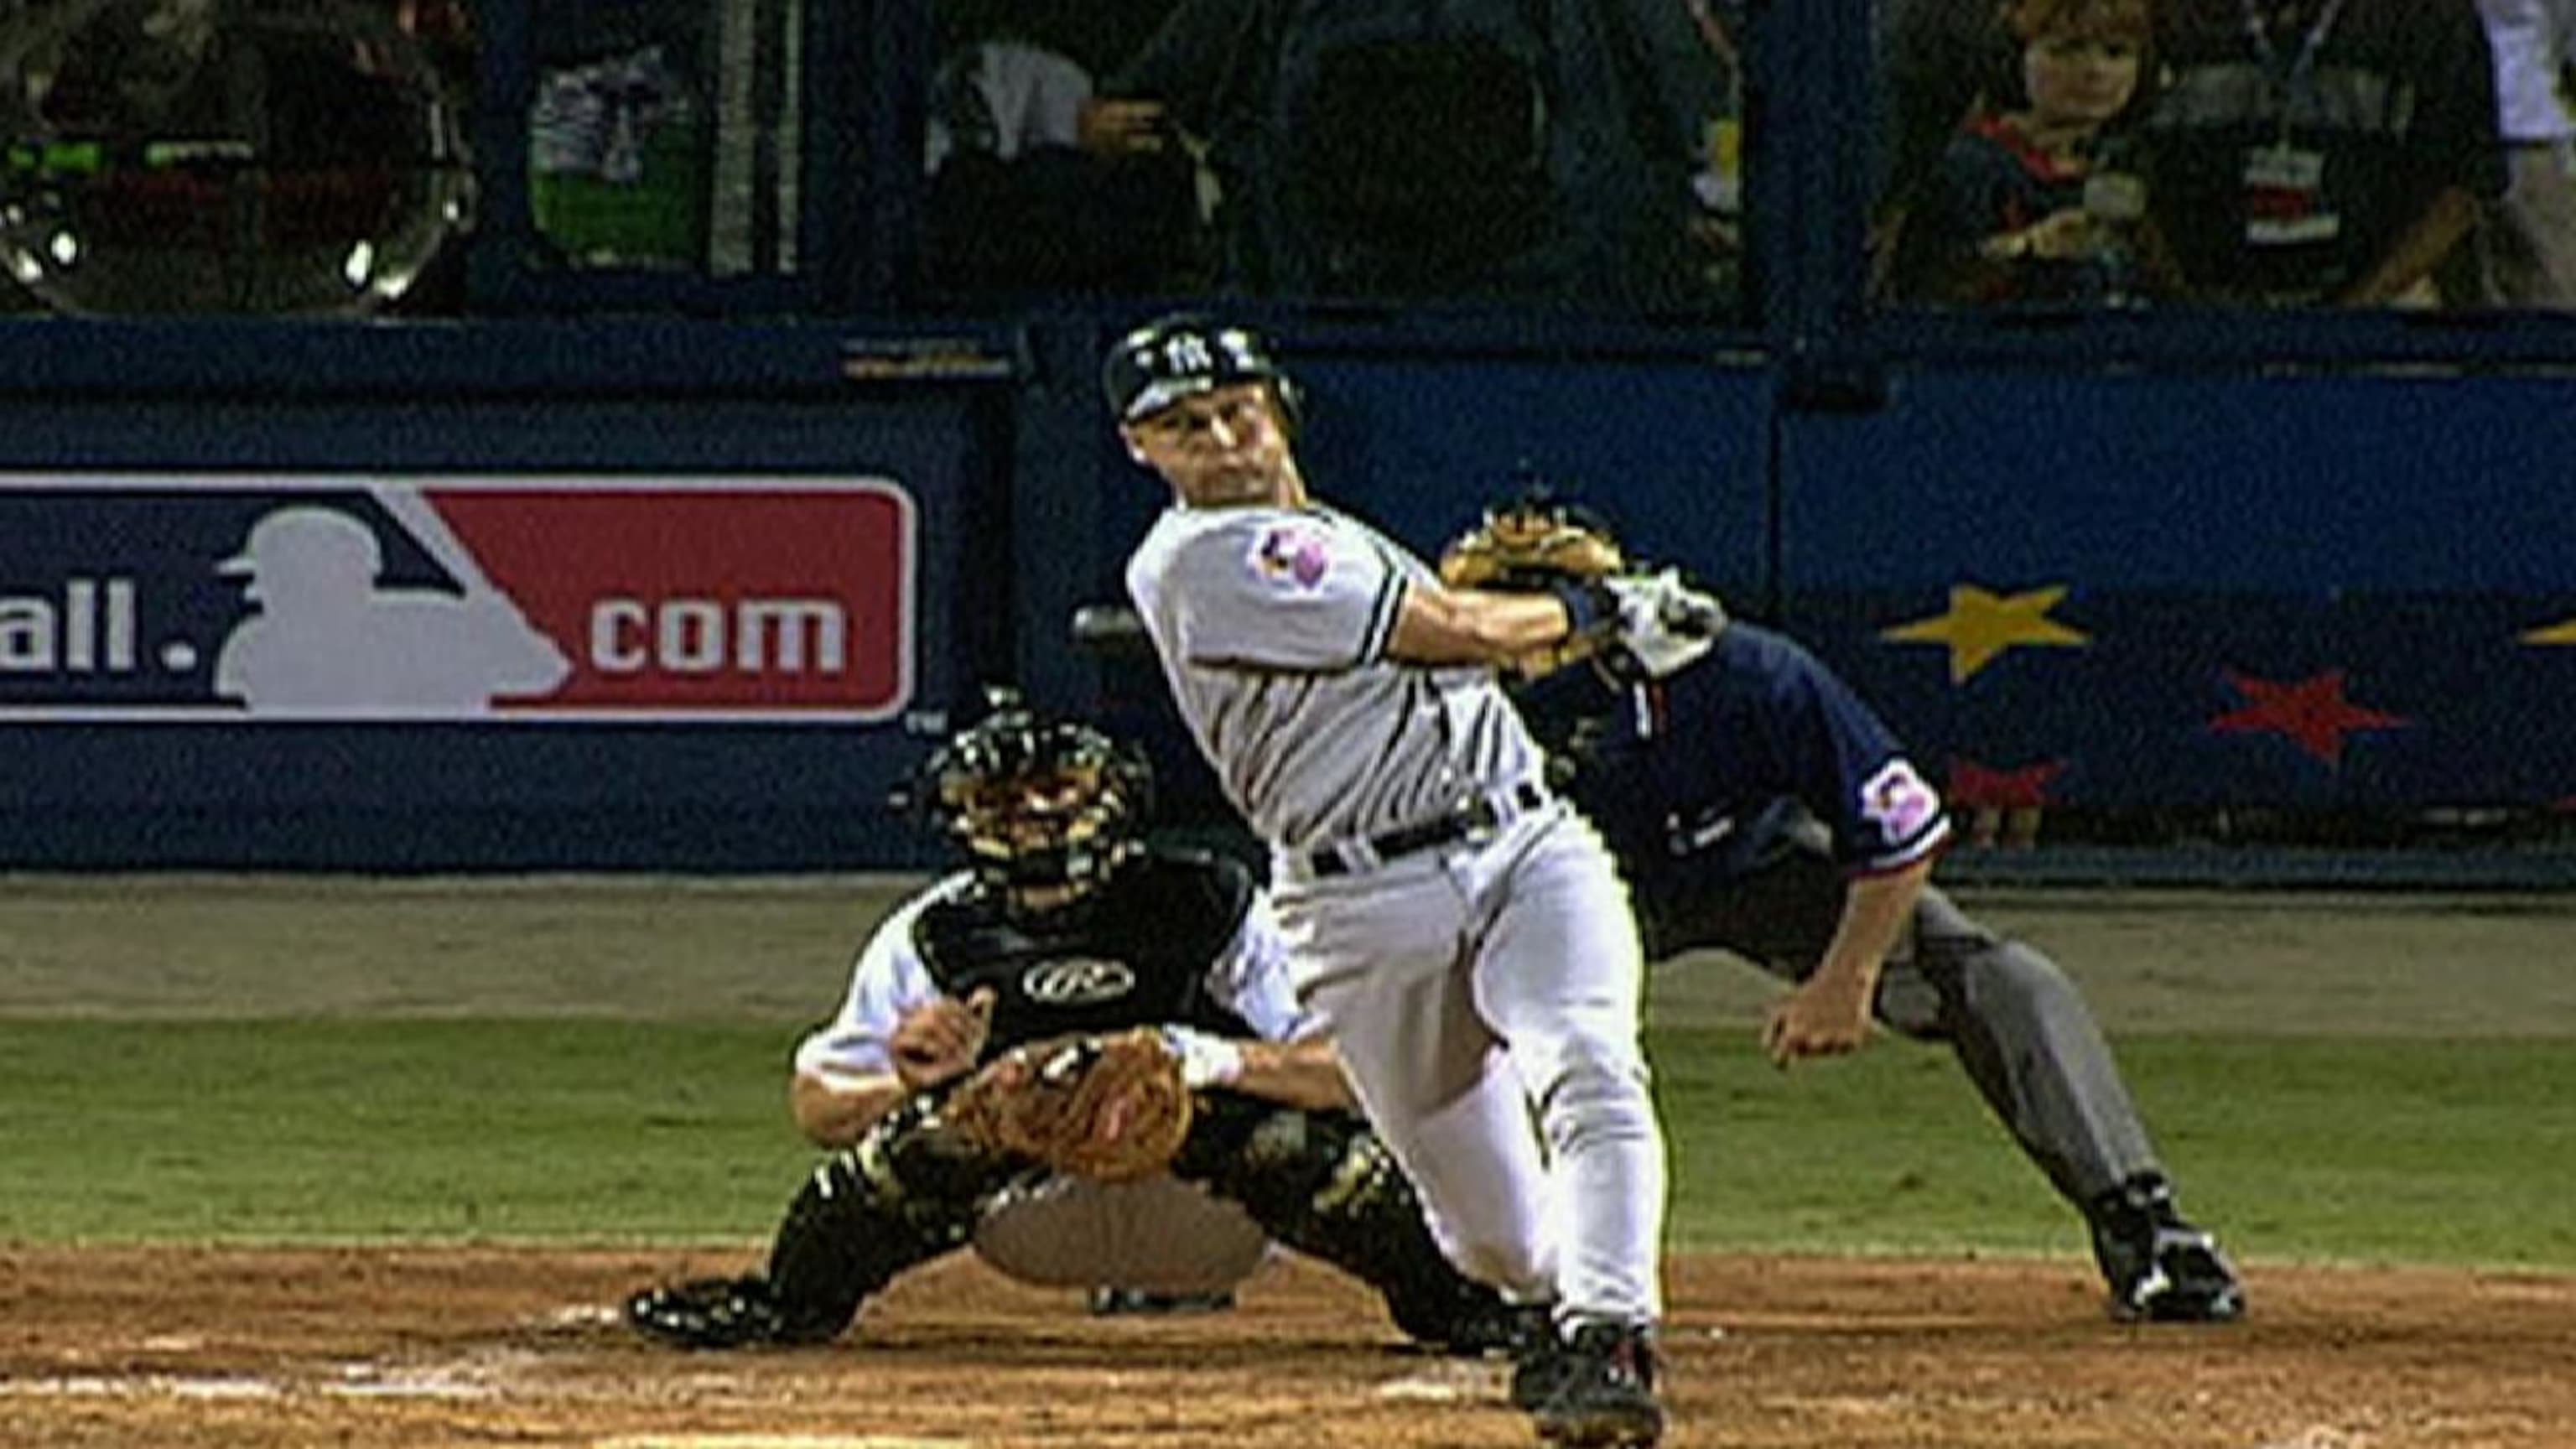 SportsCenter Top 10 Plays: Top 10 MLB All-Star Game Moments 